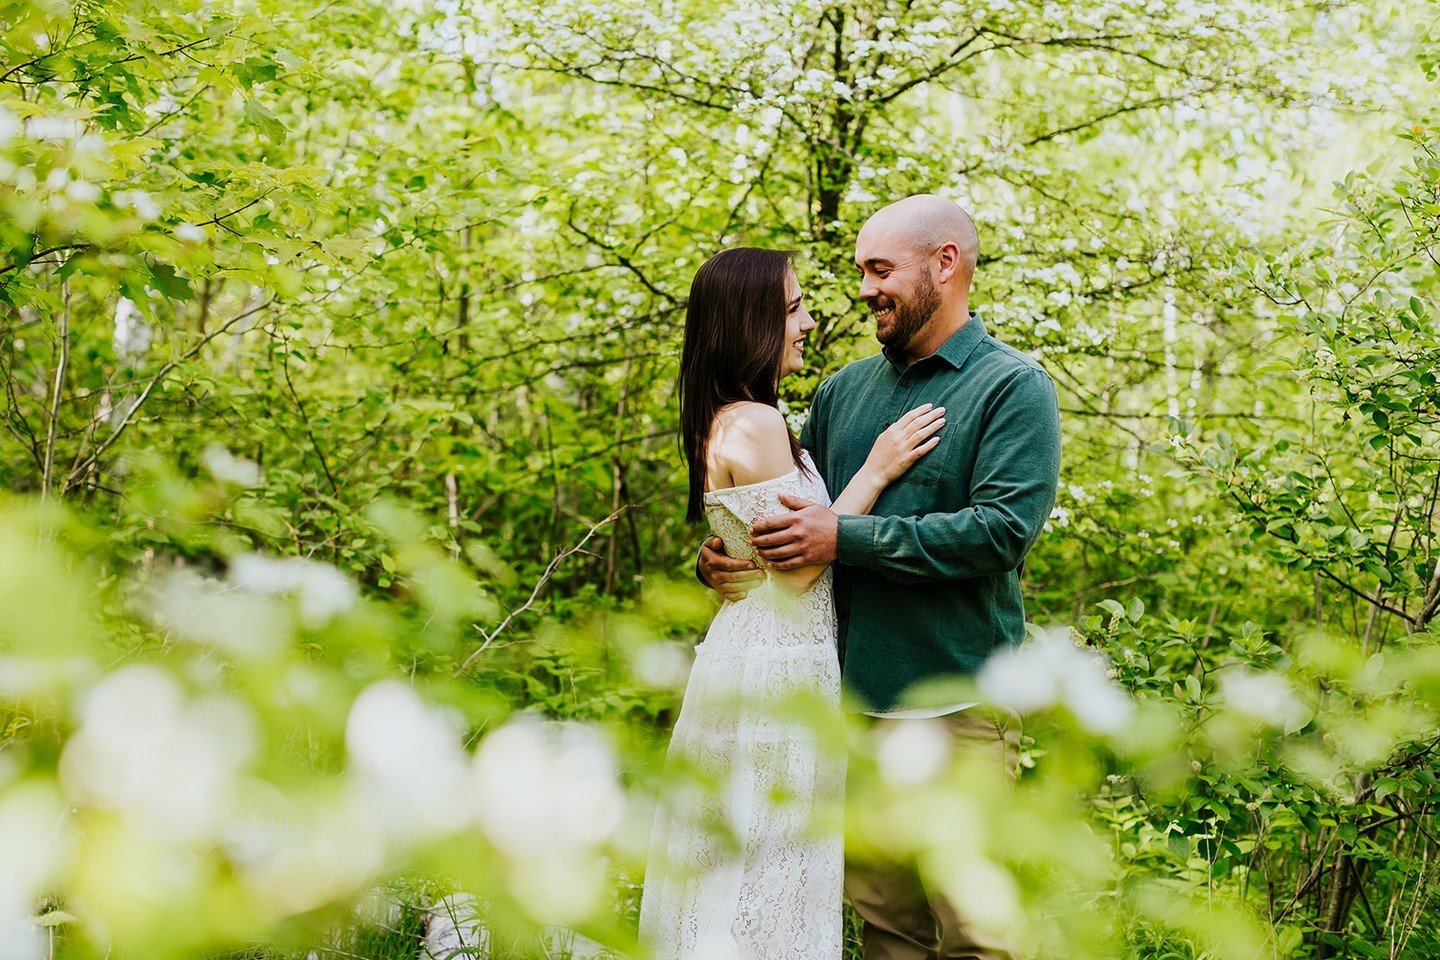 Here are some tips to make the most of your spring engagement photoshoot. 

1. Choose a scenic outdoor location with blooming flowers or lush greenery to capture the essence of the season. 

2. Coordinate your outfits with soft pastel colours or flor